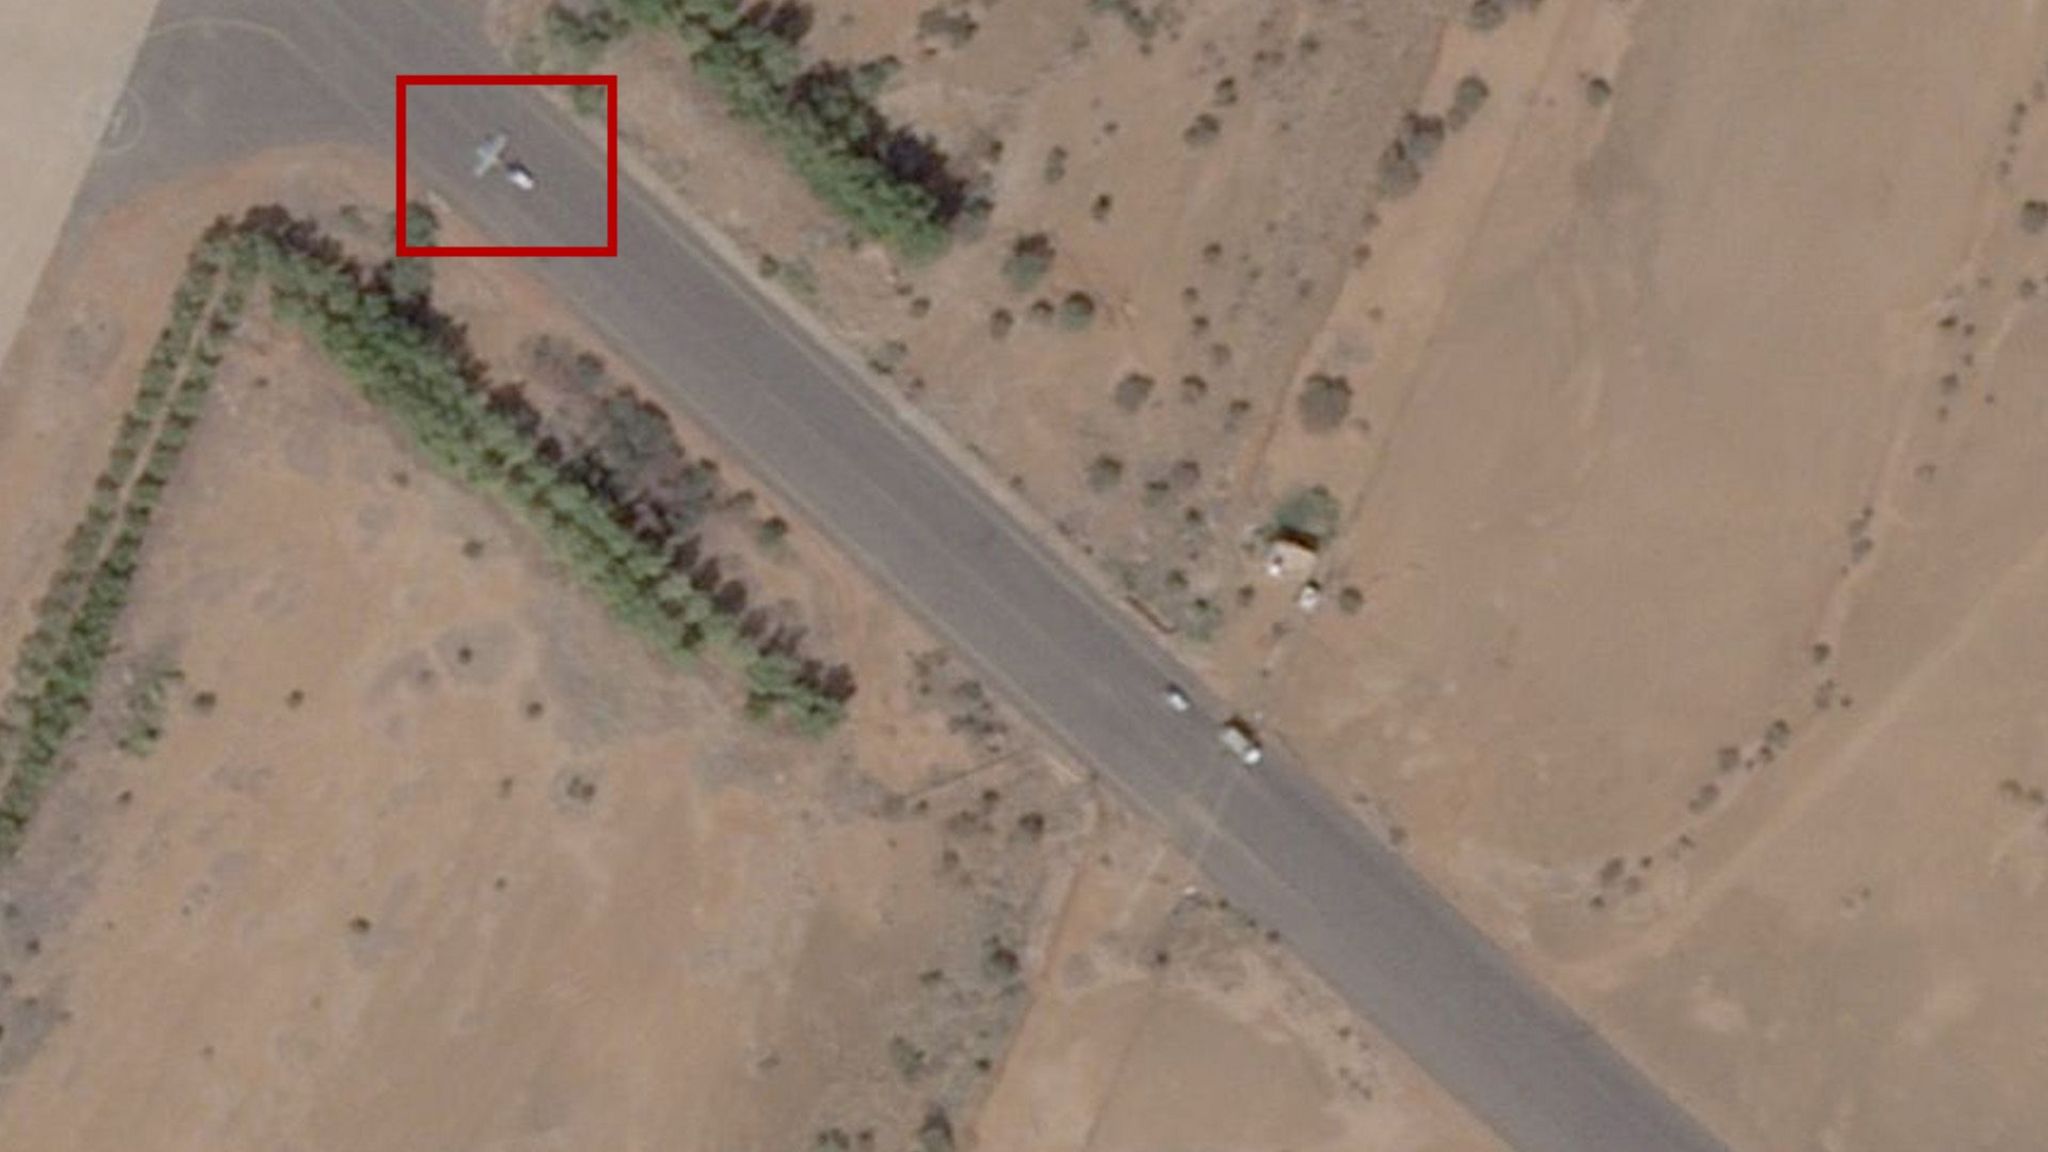 The drone identified at Wadi Seidna had a length of 6.5m and wingspan of 10m